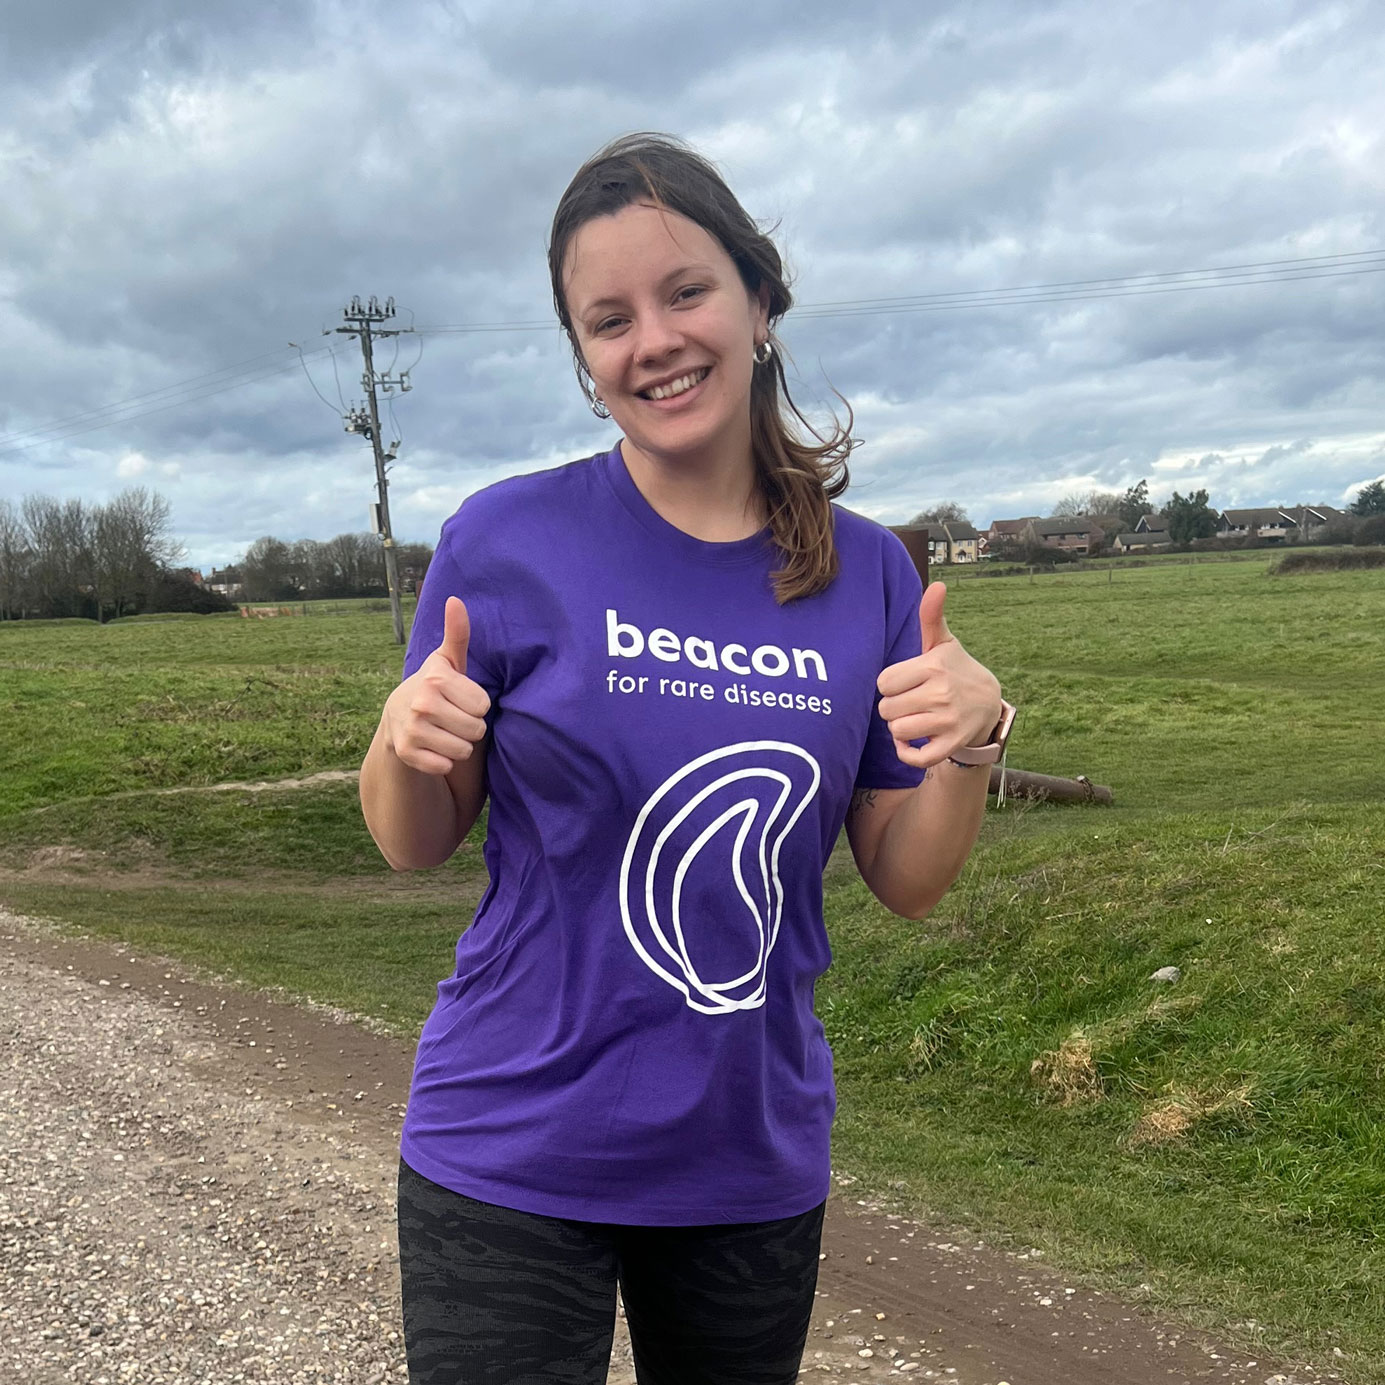 Photo of a woman training for a fundraising run wearing a Beacon t-shirt